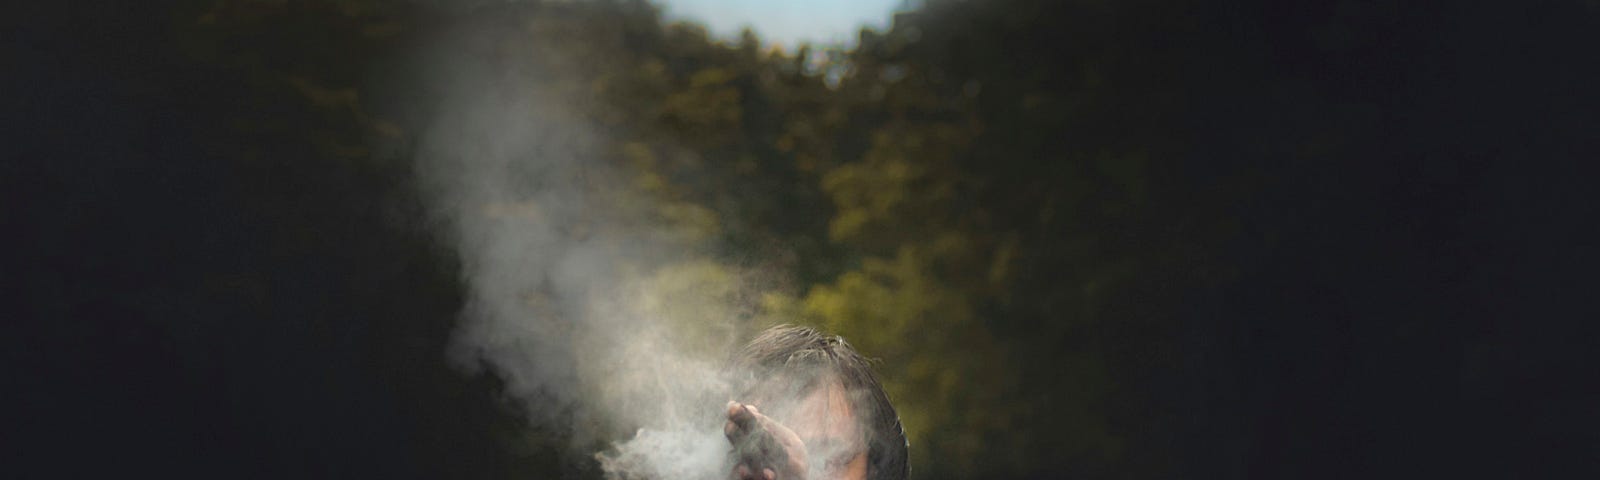 Person partially obscured by a dust cloud.